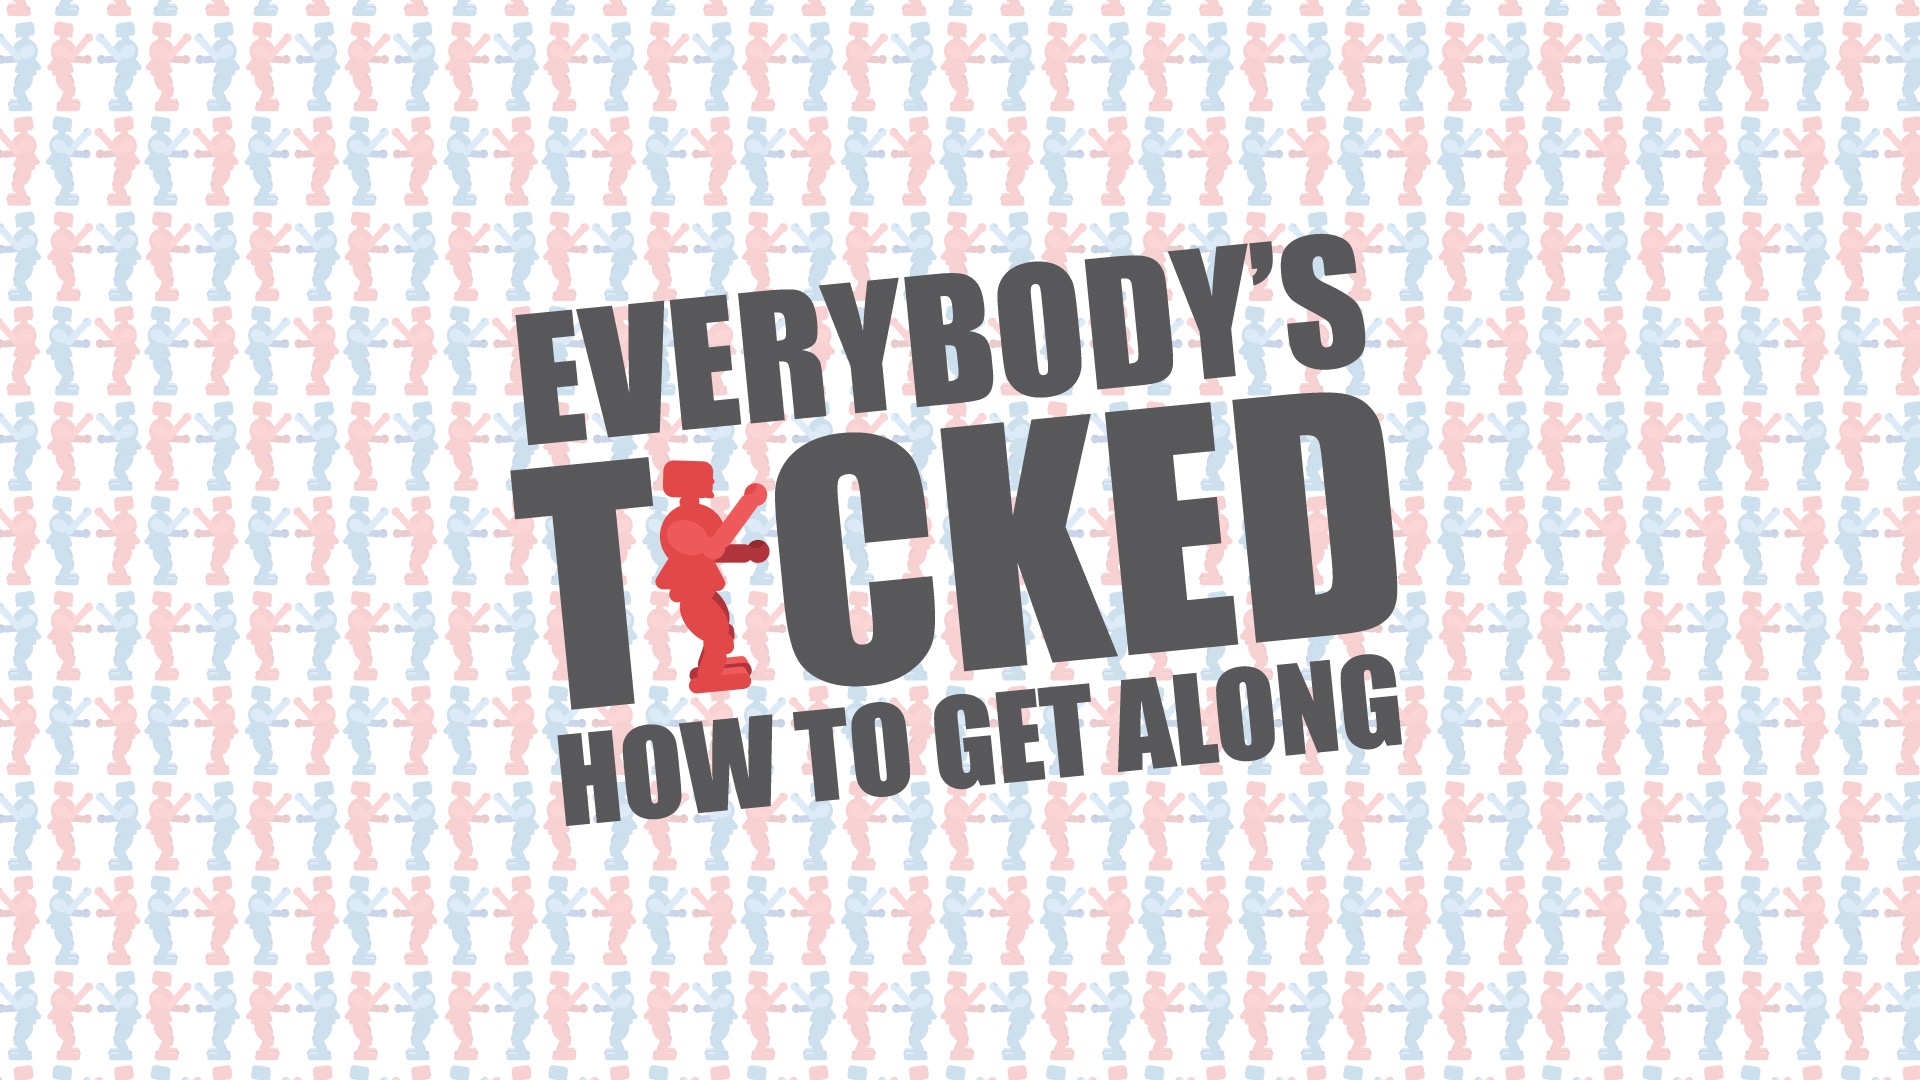 Everybody's Ticked: How To Get Along - Part II